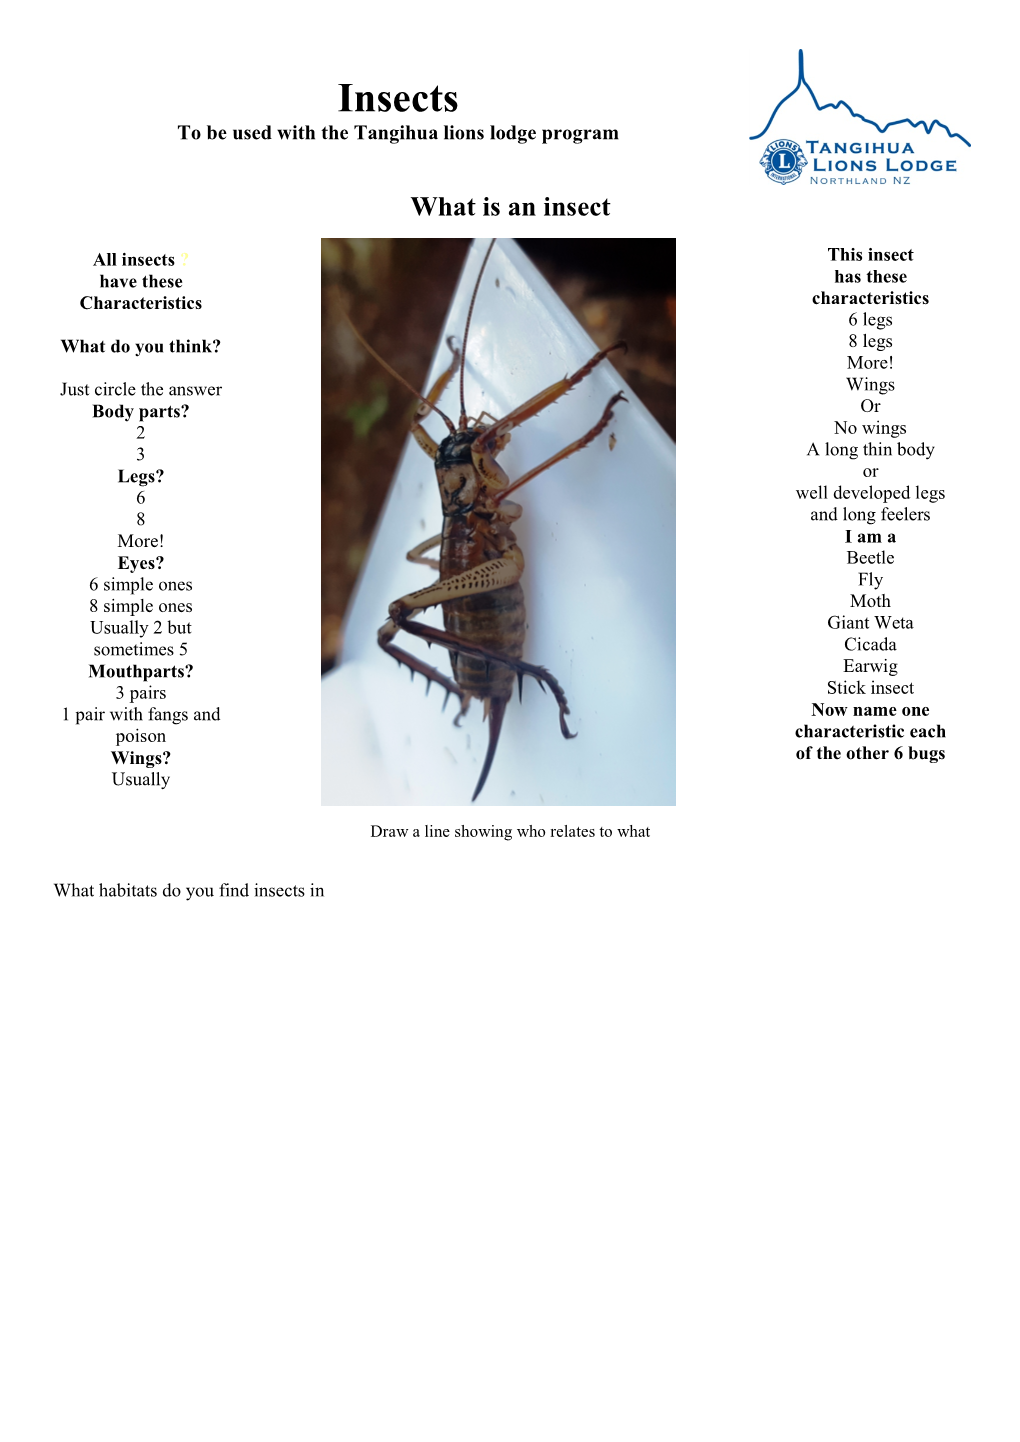 Weta Sometimes 5 Cicada Mouthparts? Earwig 3 Pairs Stick Insect 1 Pair with Fangs and Now Name One Poison Characteristic Each Wings? of the Other 6 Bugs Usually